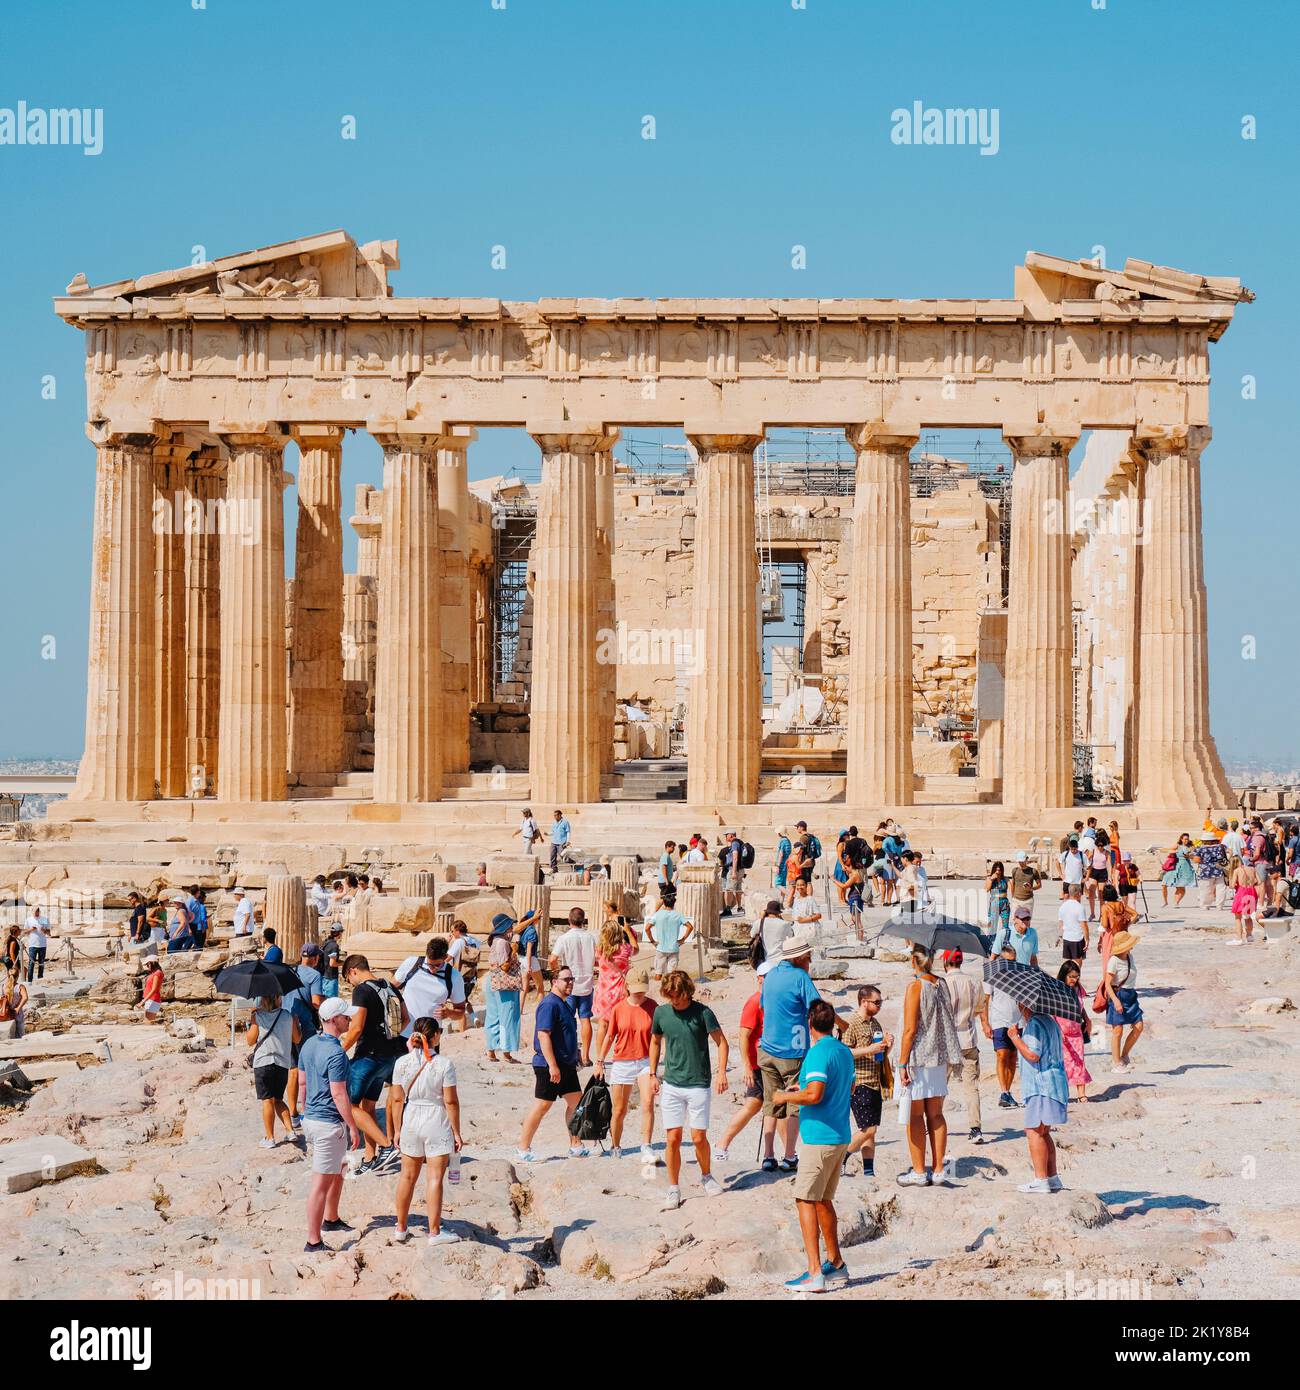 Athens, Greece - August 30, 2022: A crowd of visitors in front of the remains of the famous Parthenon, in the Acropolis of Athens, Greece Stock Photo